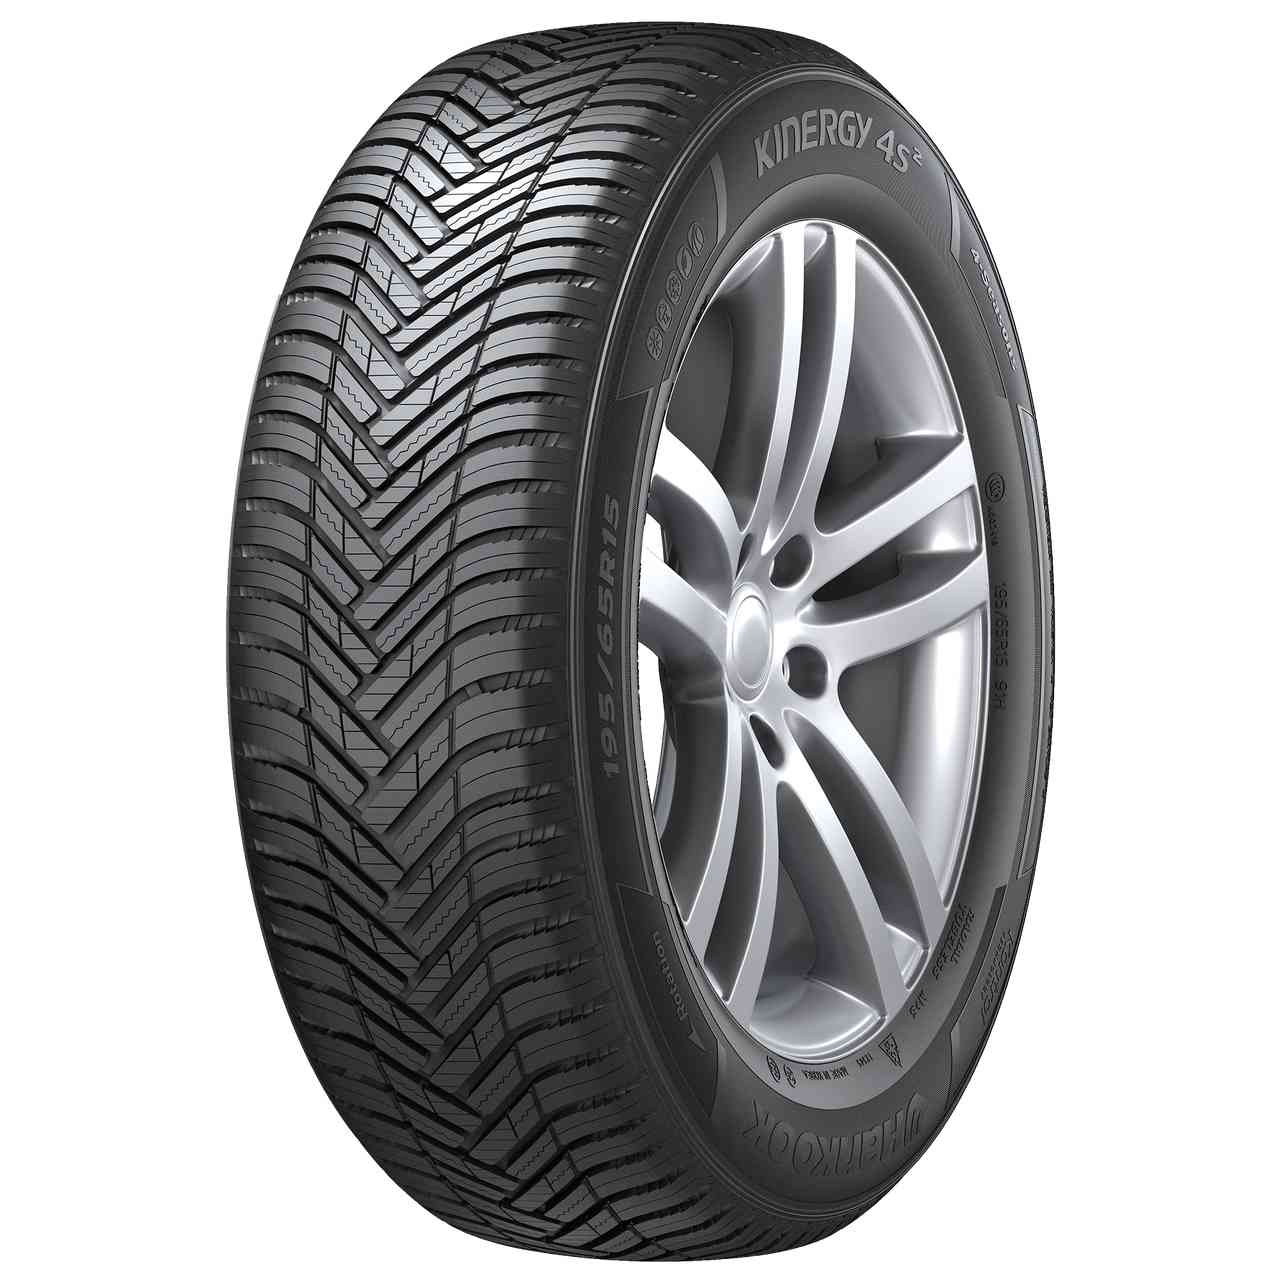 HANKOOK KINERGY 4S 2 (H750) 225/40R18 92Y BSW XL